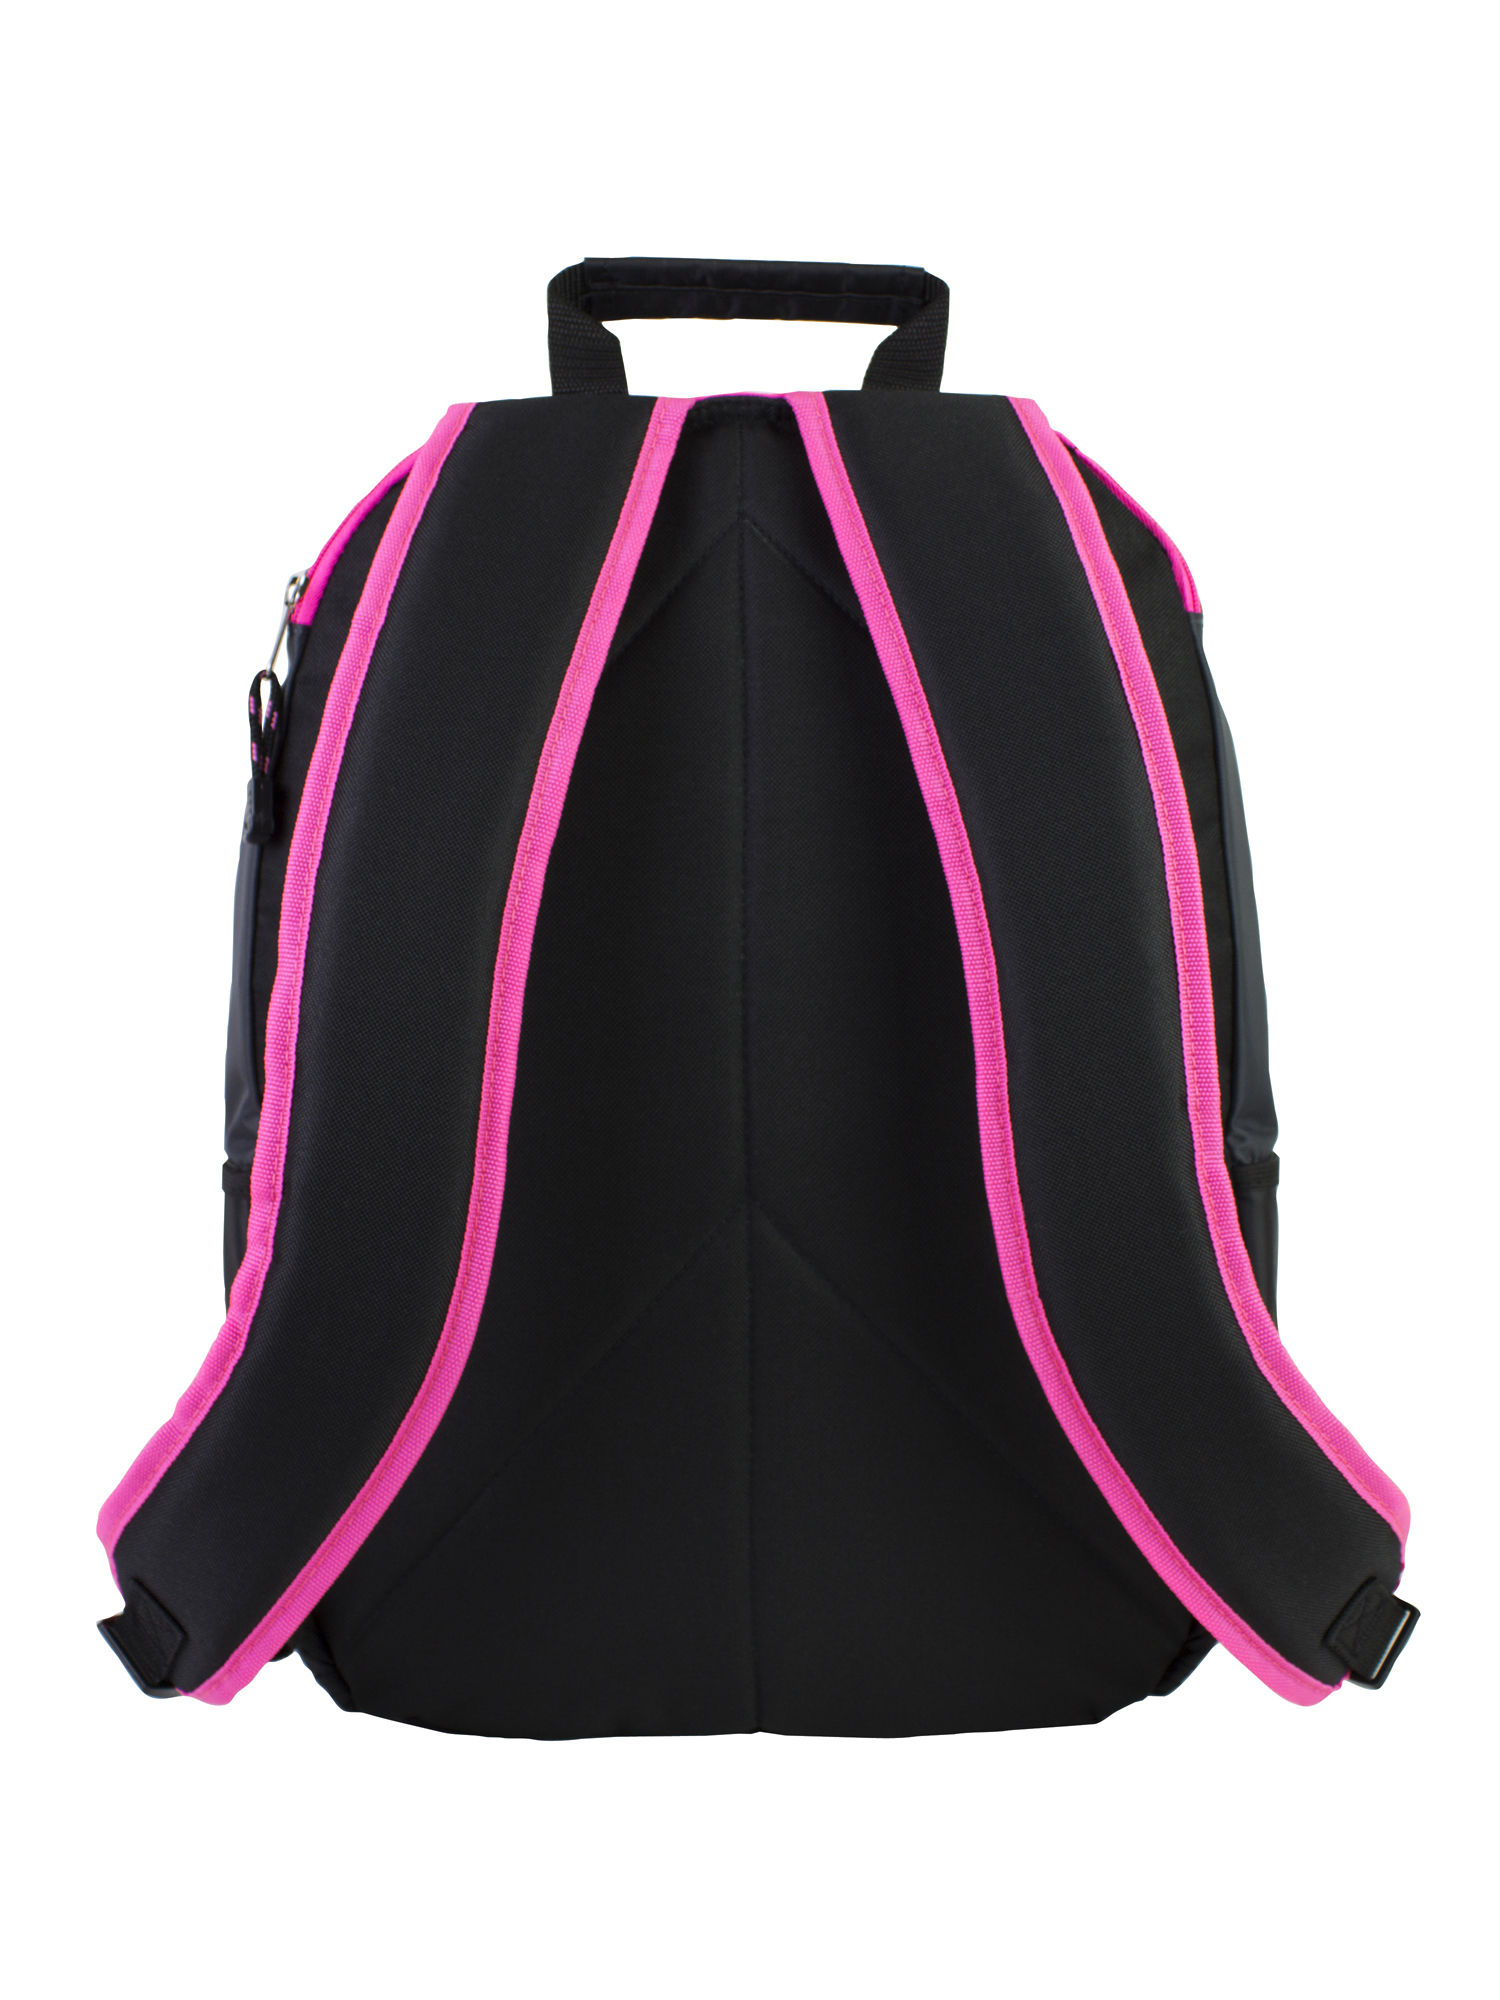 Eastsport Absolute Sport Backpack with 5 Compartments - image 2 of 4